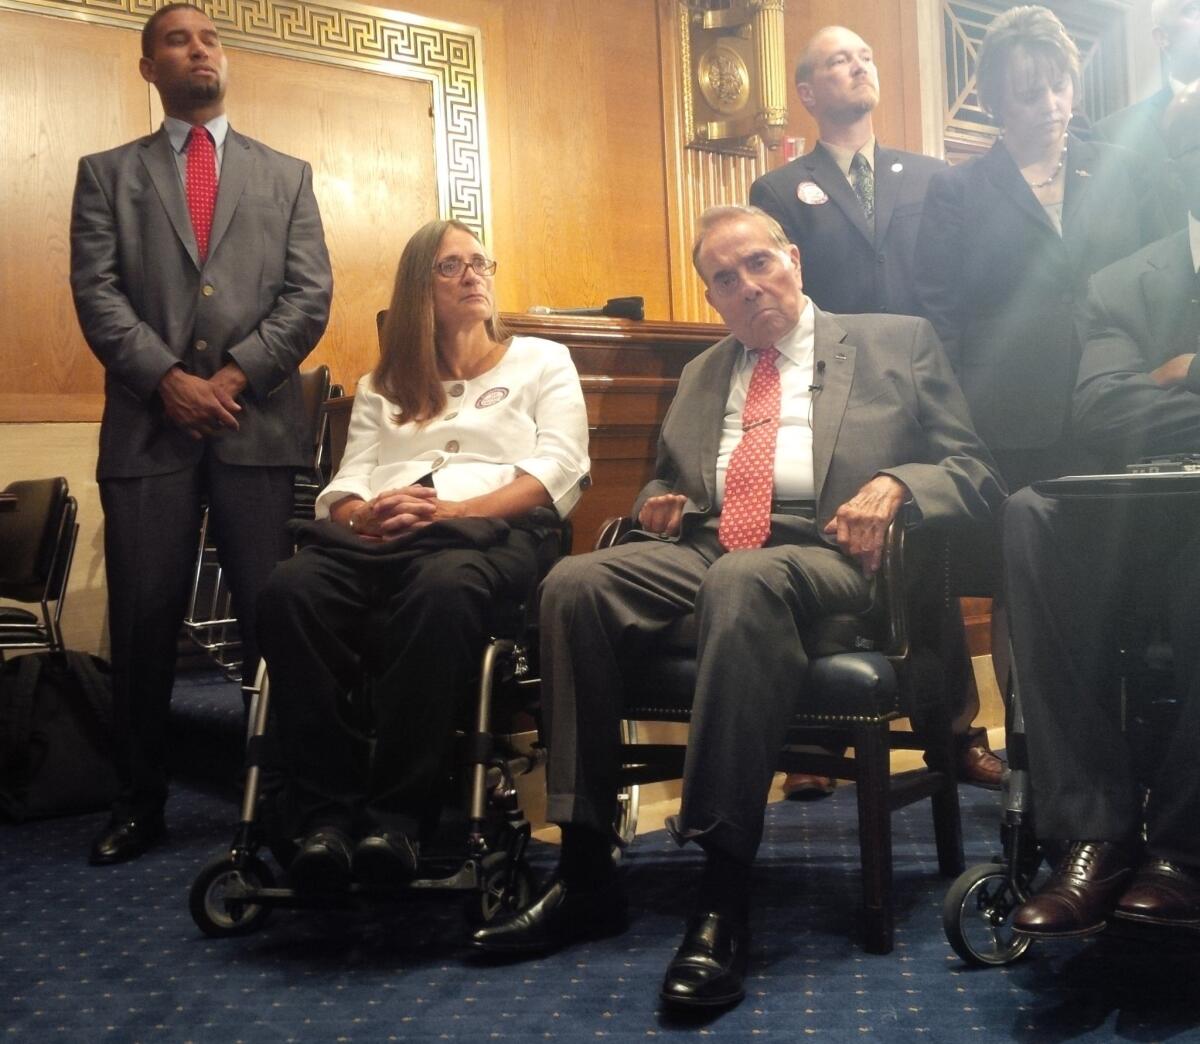 Former Sen. Bob Dole appears at a news conference on Capitol Hill, where he visited to support ratification of the Convention on the Rights of Persons with Disabilities.